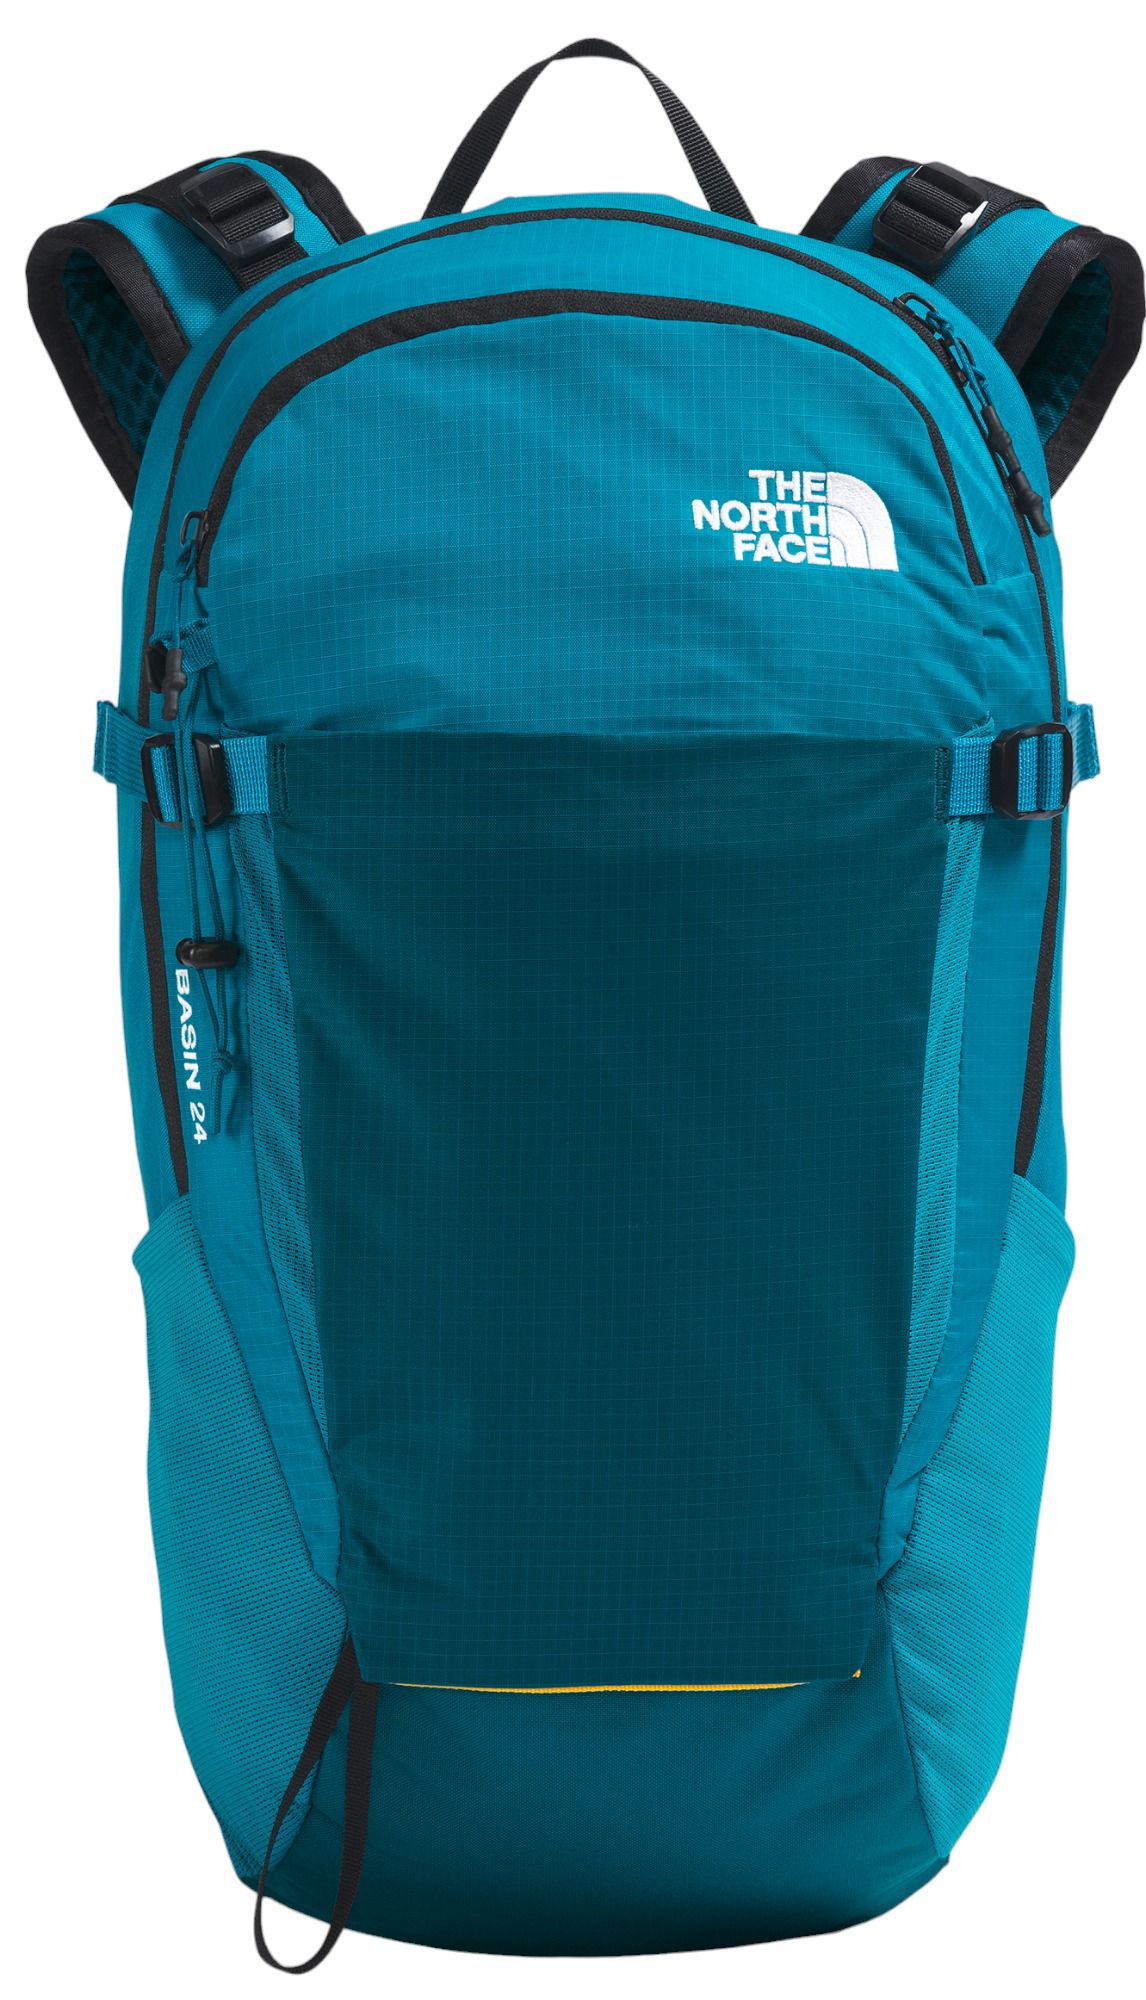 The North Face Basin 24 Daypack